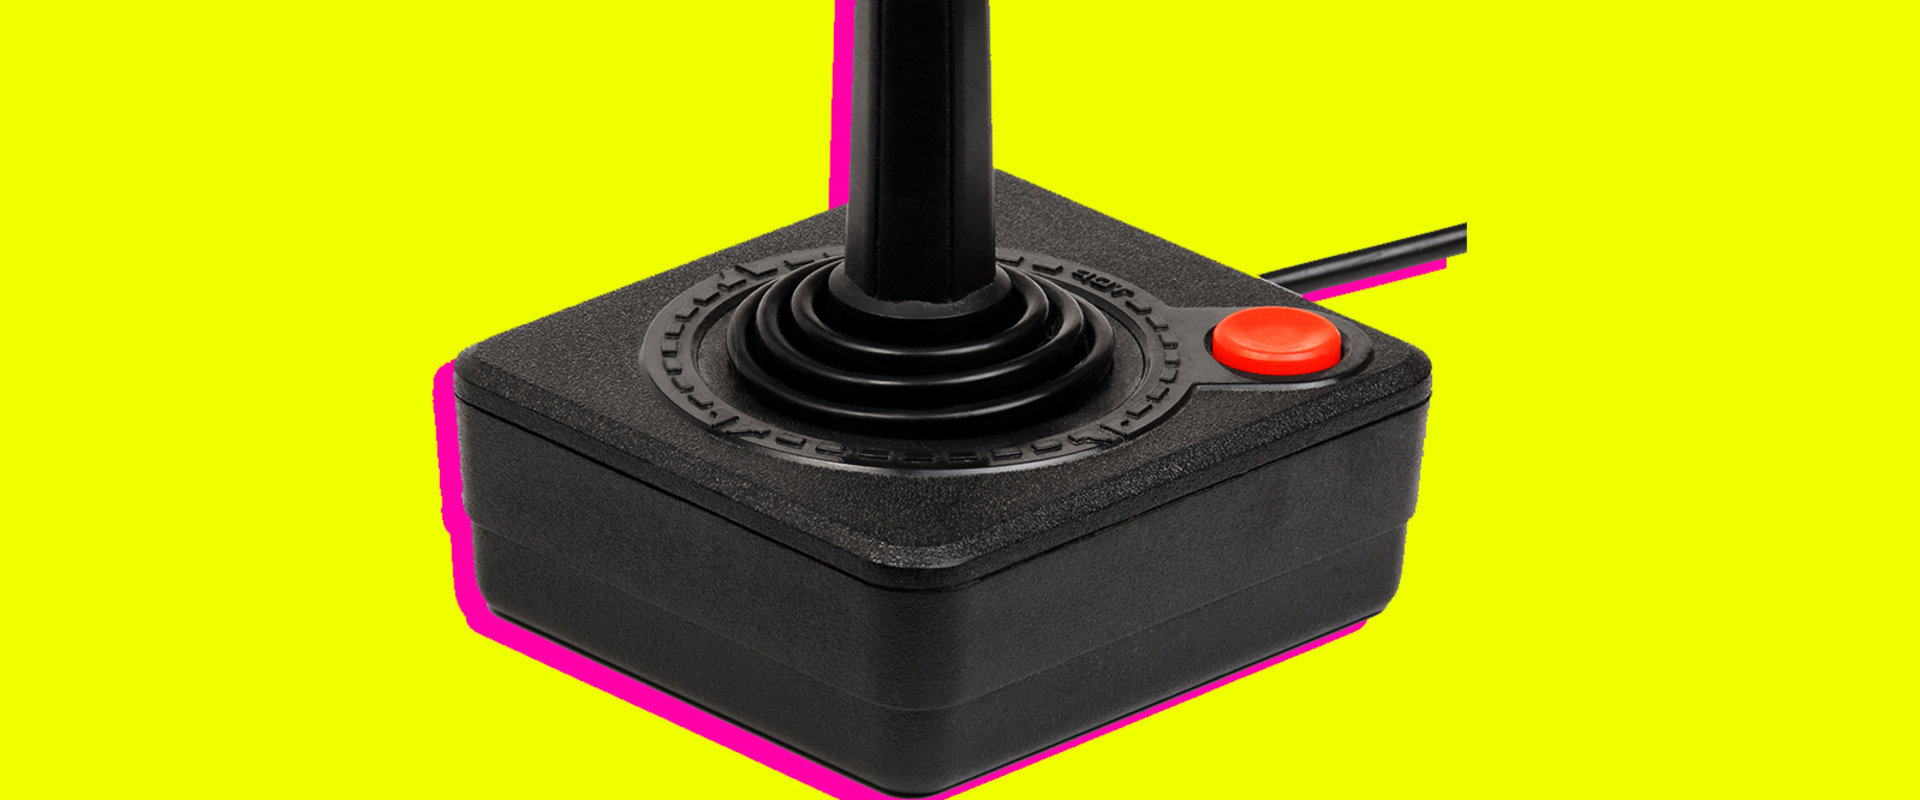 Console Controllers and Joysticks: An Overview